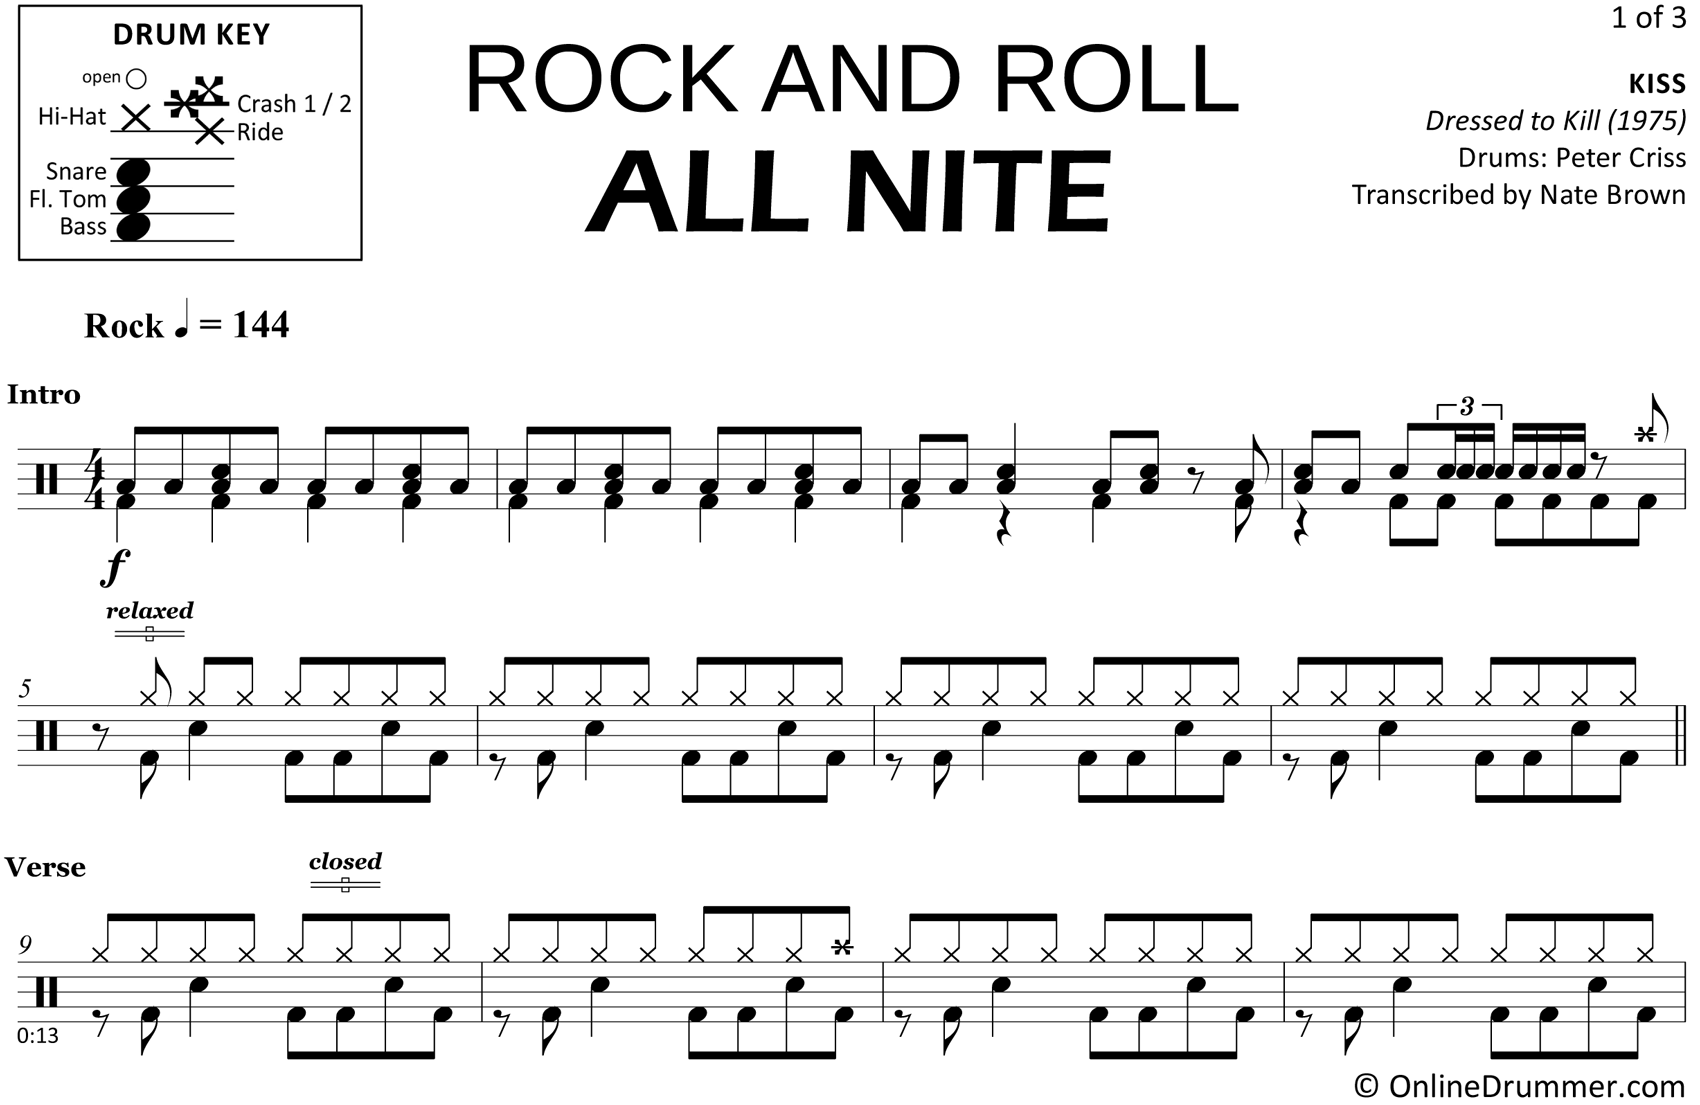 Rock and Roll All Nite - KISS - Drum Sheet Music